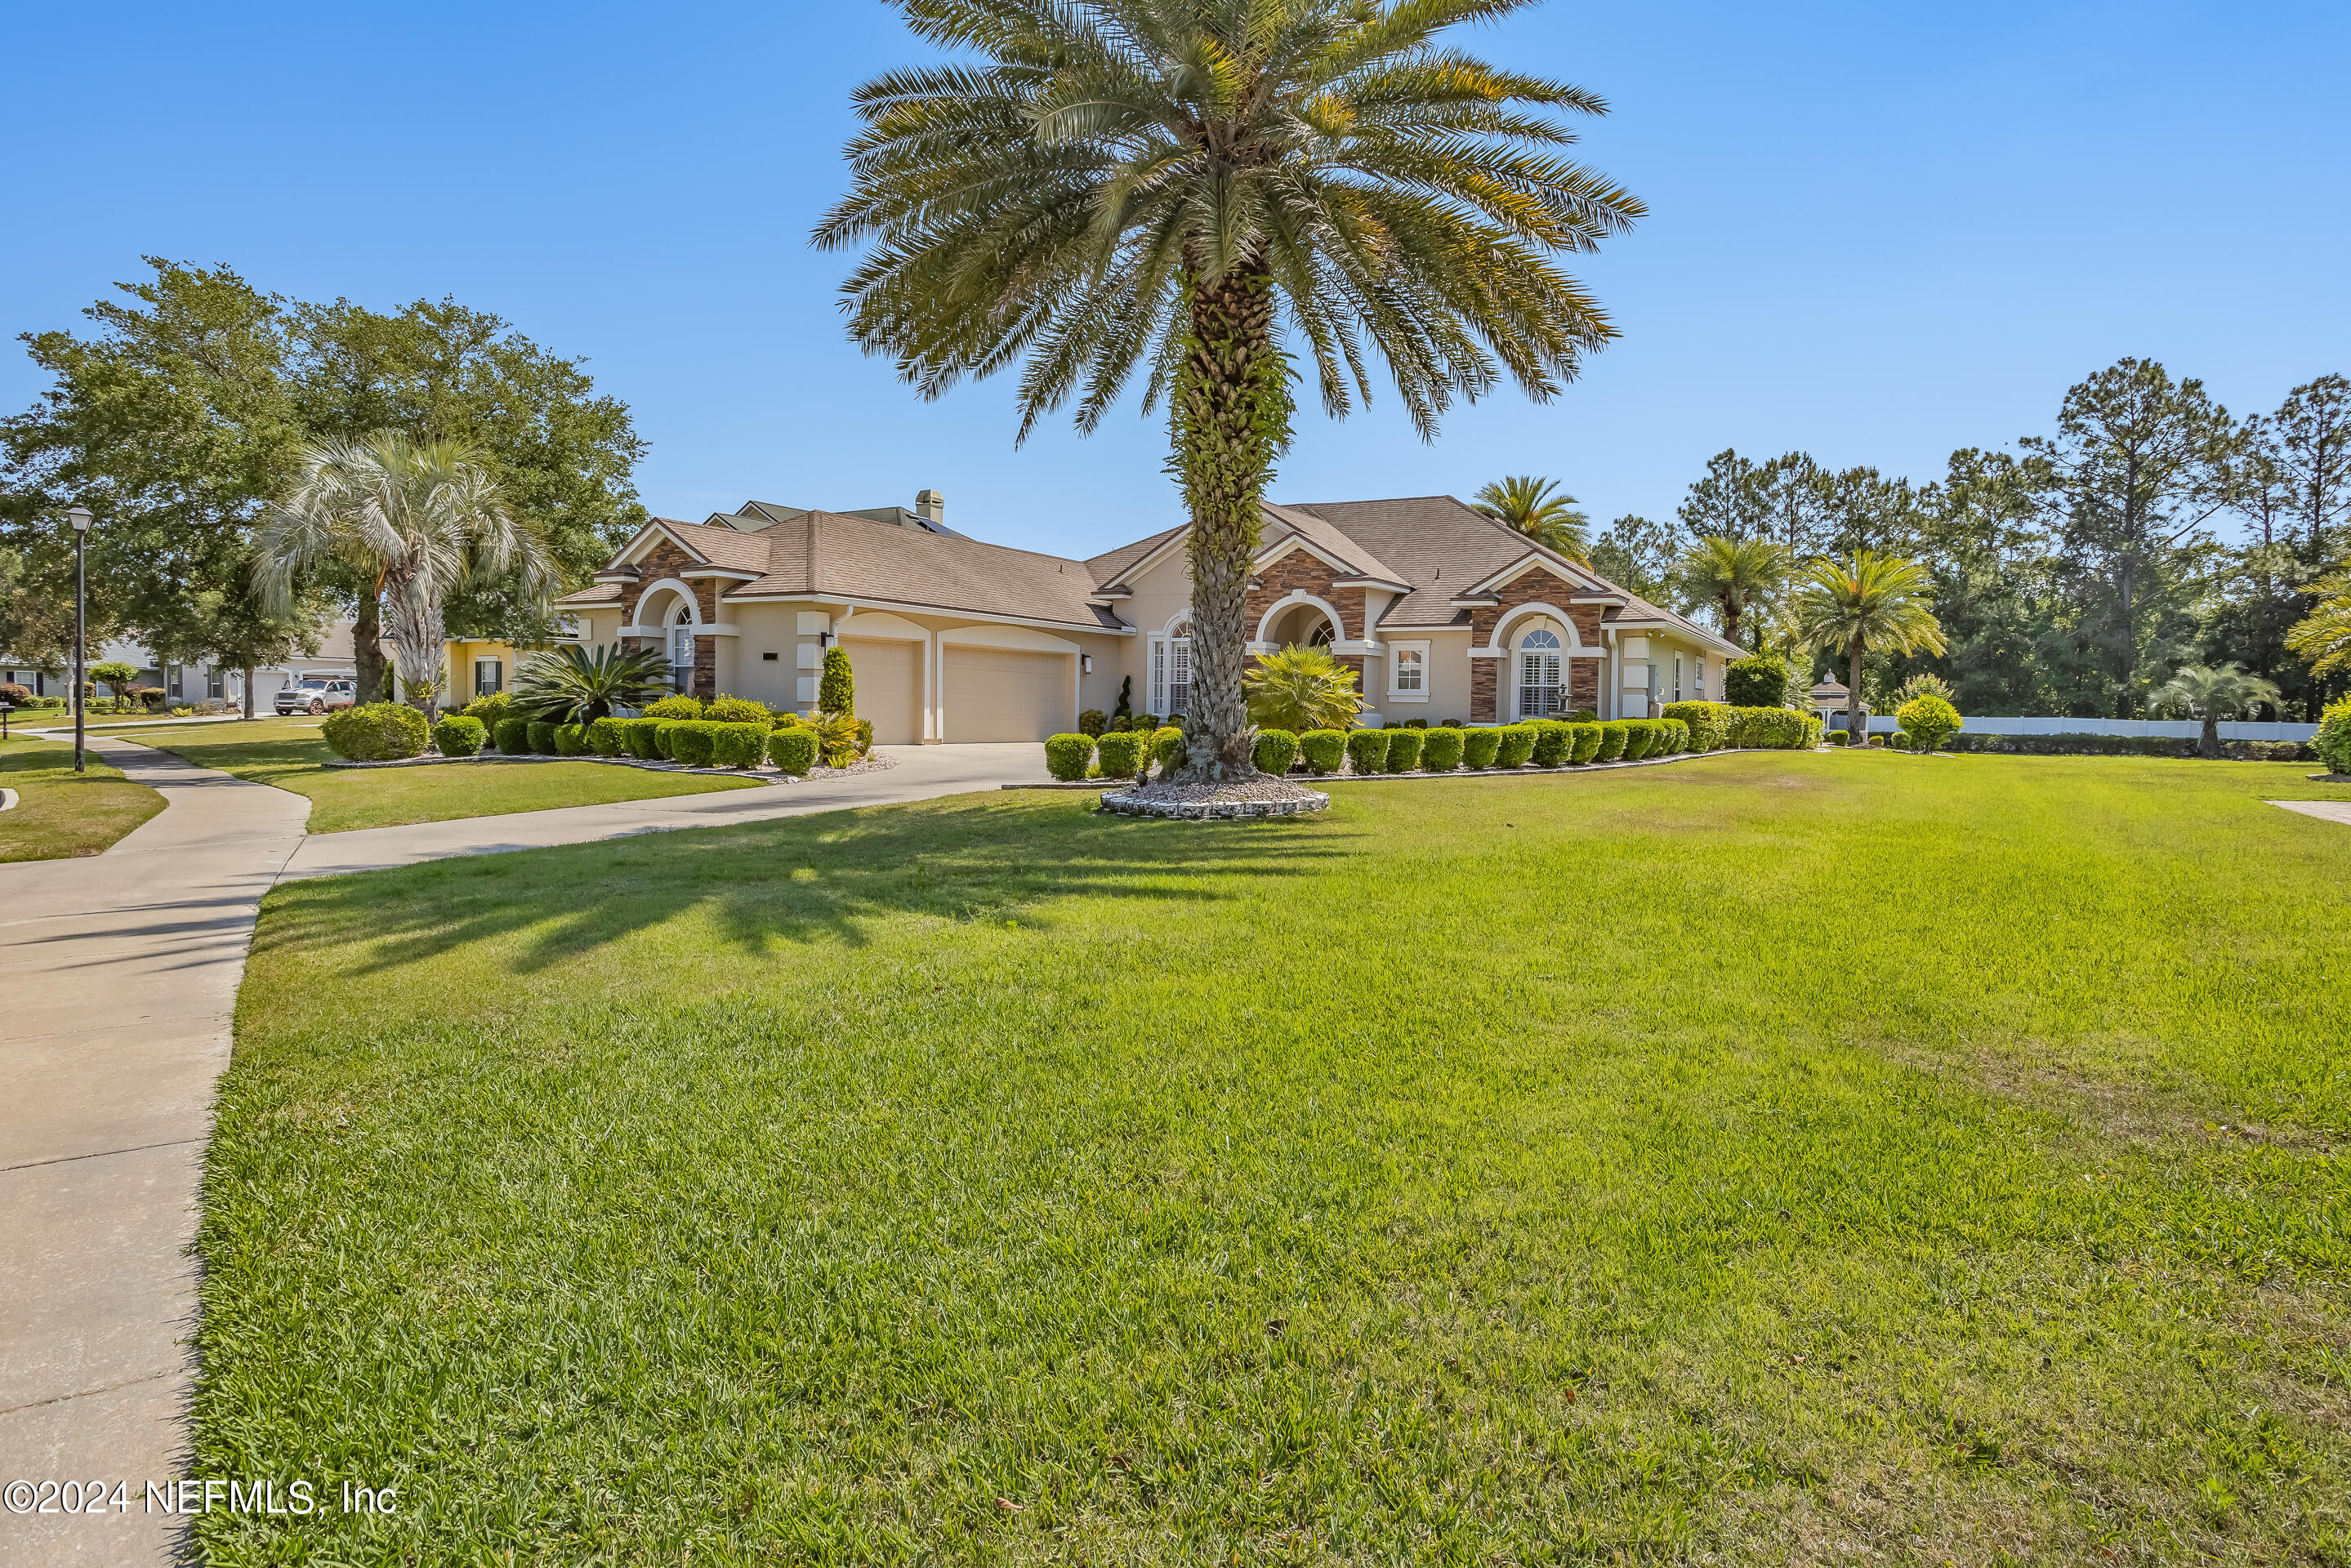 Jacksonville, FL home for sale located at 7973 Dawsons Creek Drive, Jacksonville, FL 32222